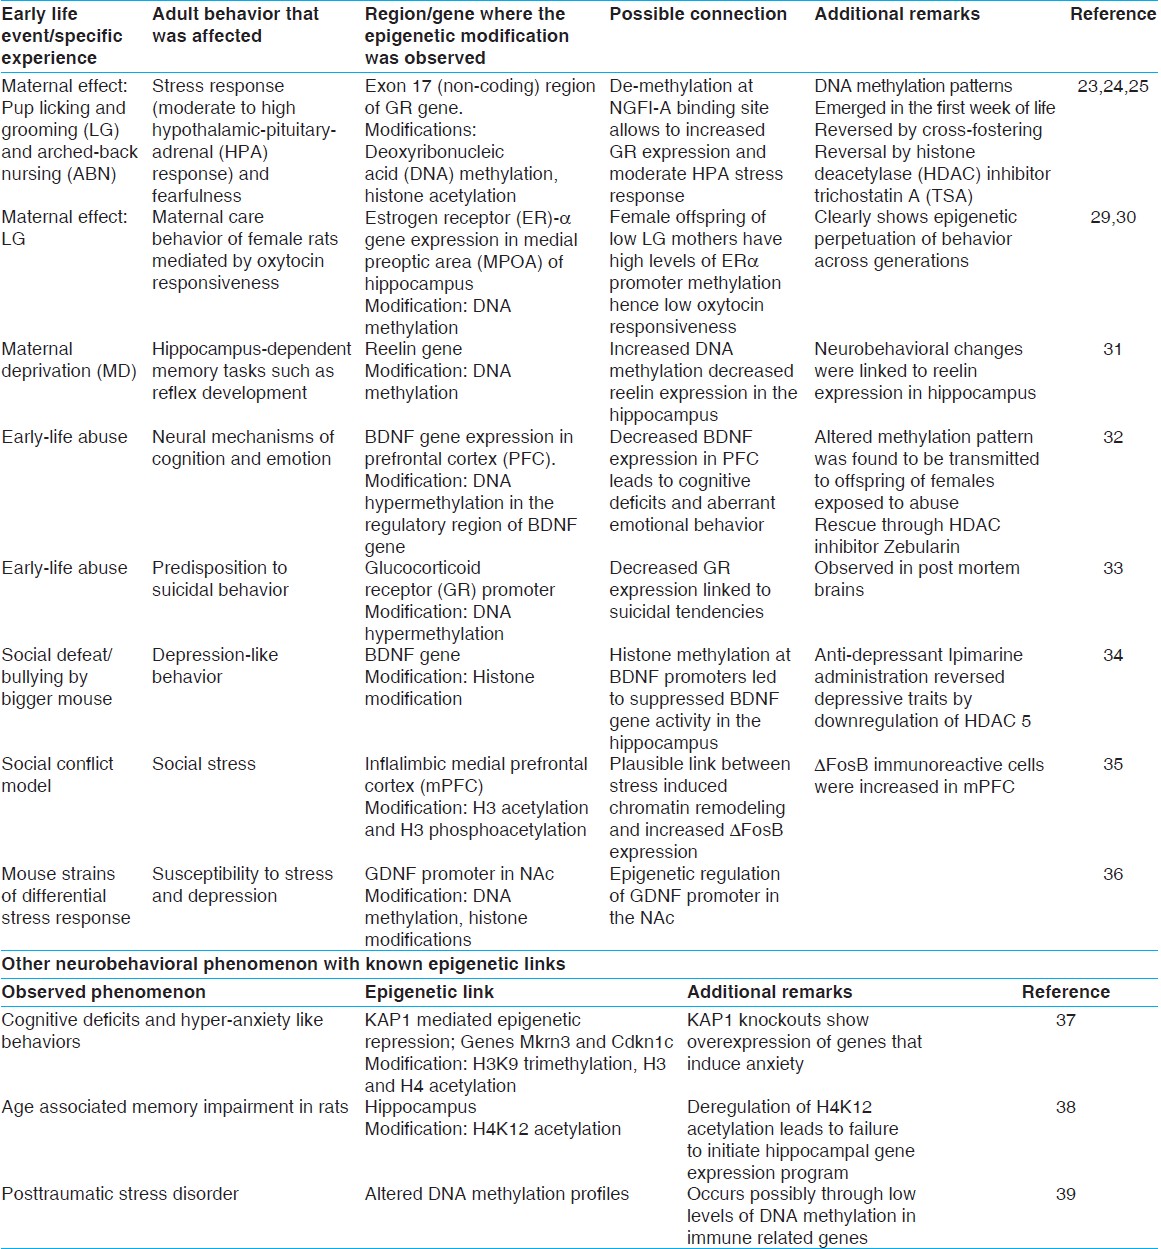 Table 1: Early-life experiences/environmental factors and their associated epigenetic modification